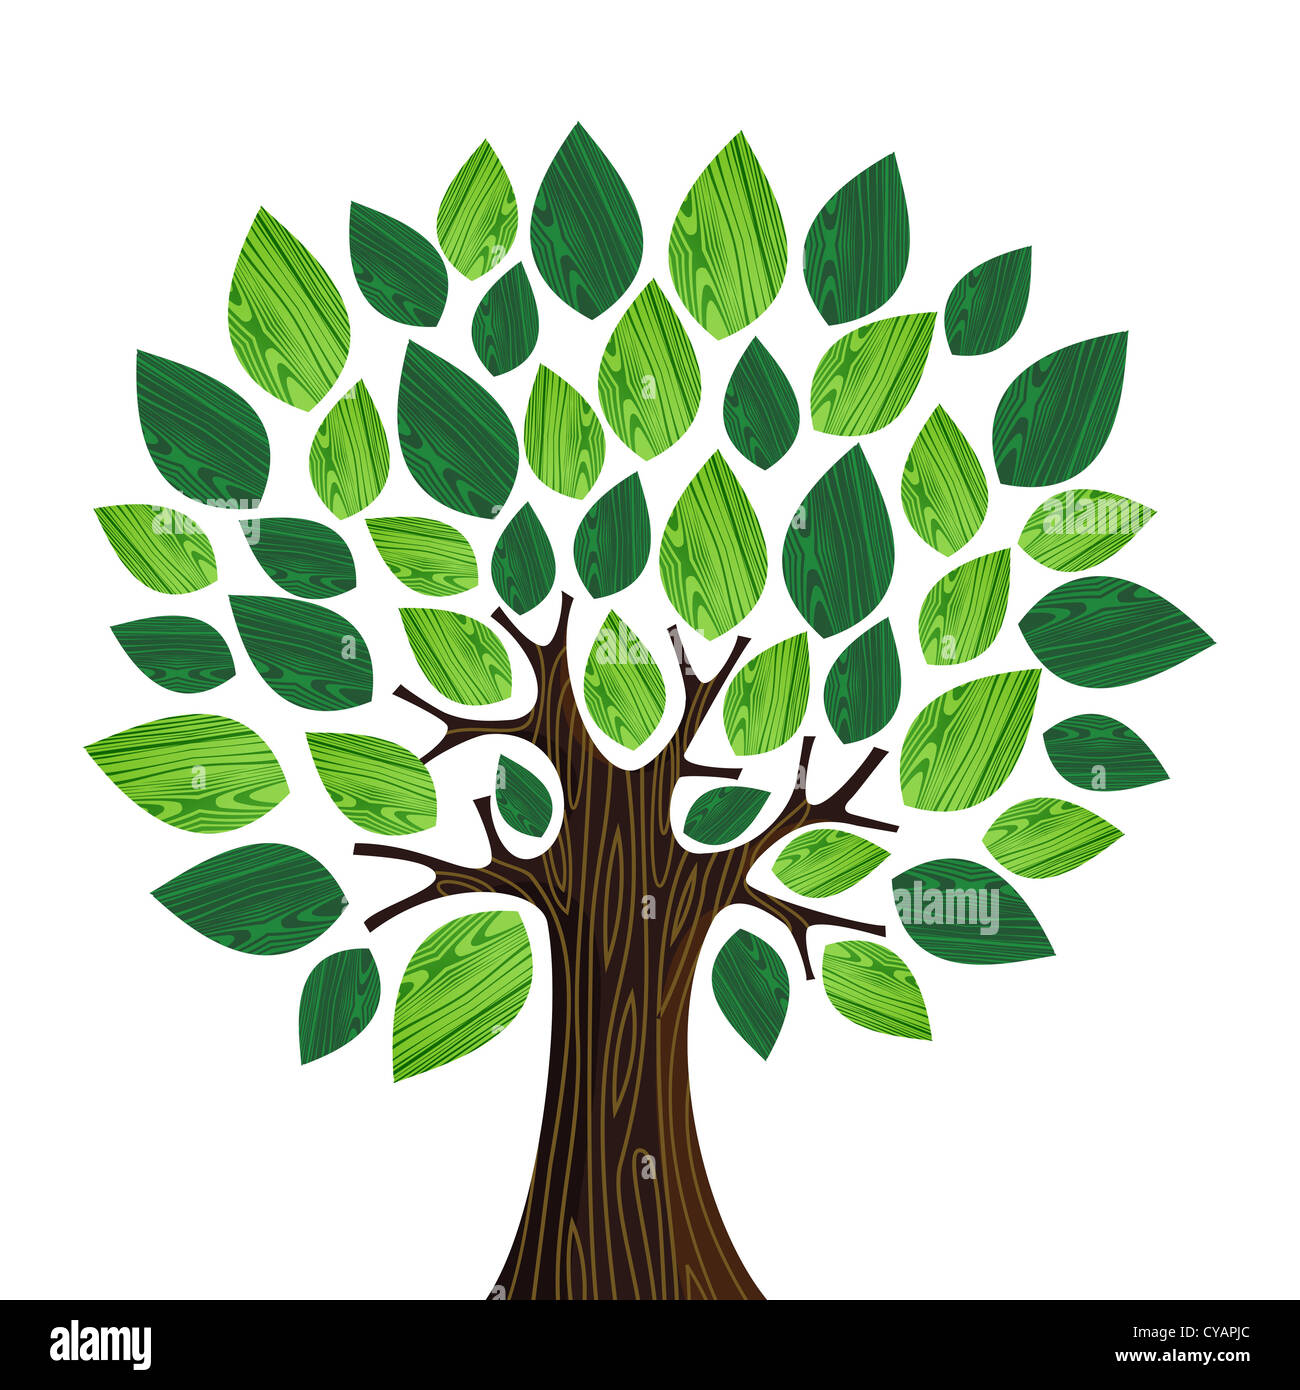 Isolated Eco friendly tree with green wooden leaves illustration. Vector file layered for easy manipulation and custom coloring. Stock Photo